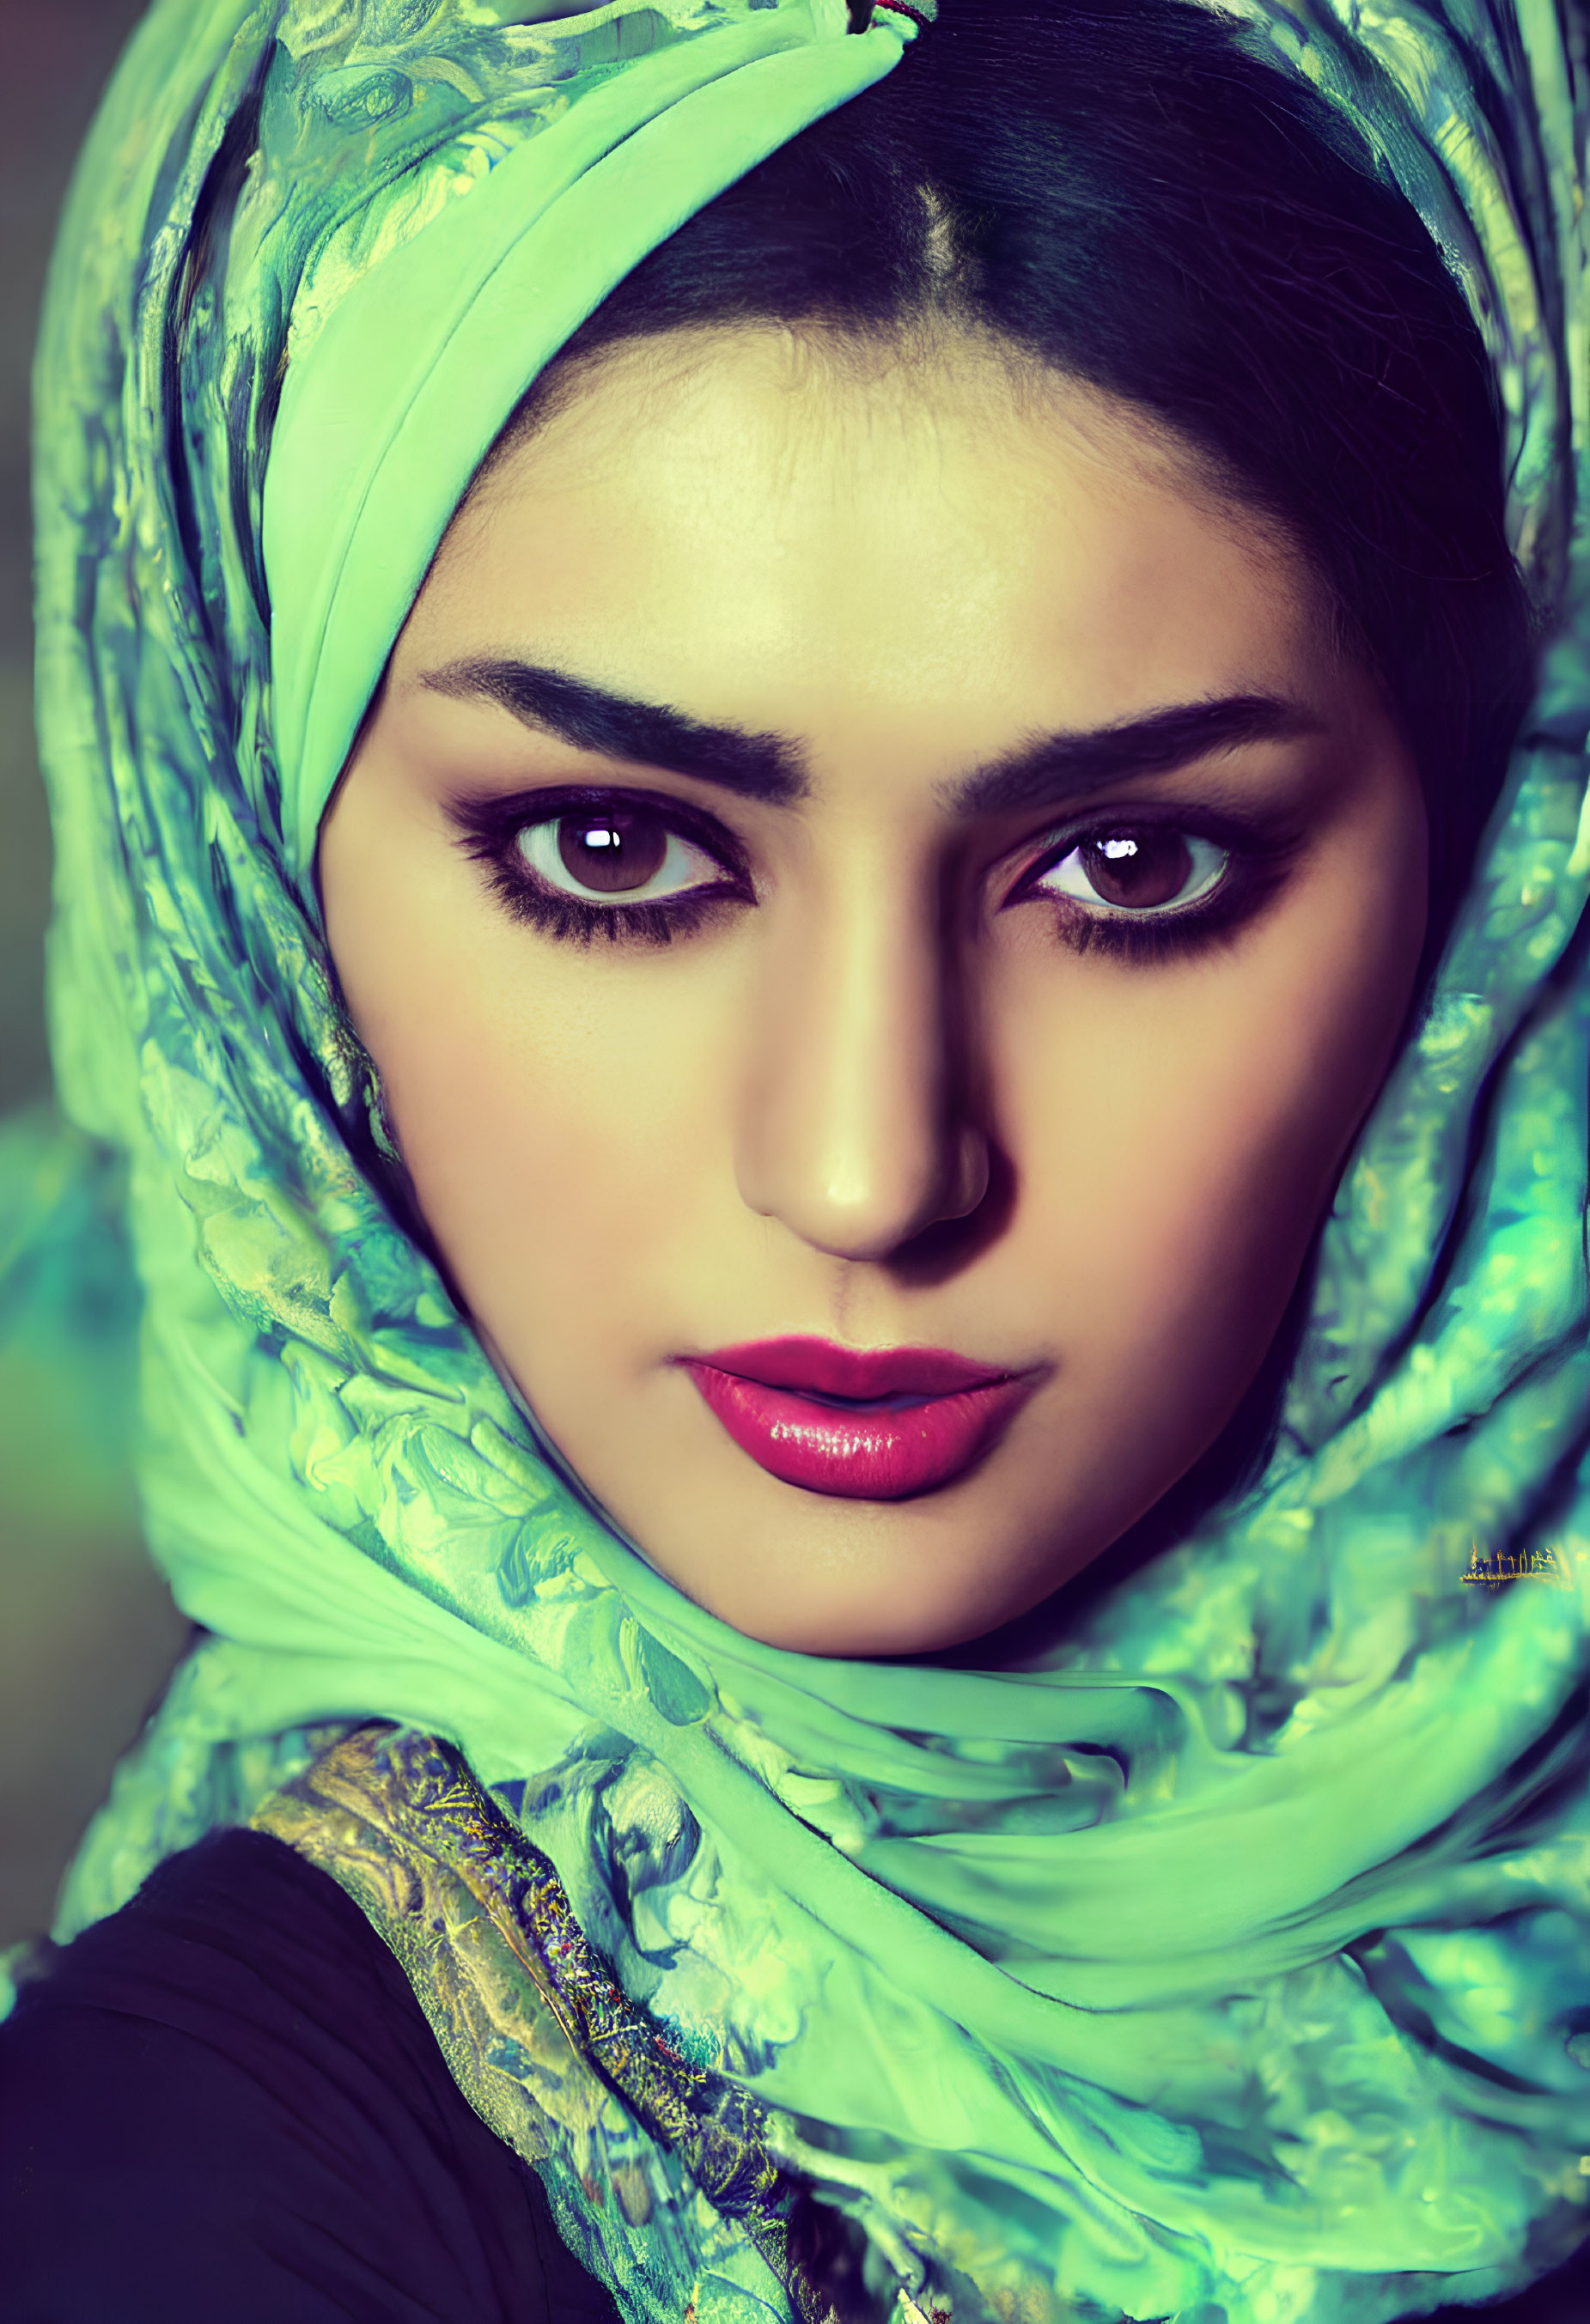 Dark-eyed woman in green headscarf with striking makeup gazes into distance